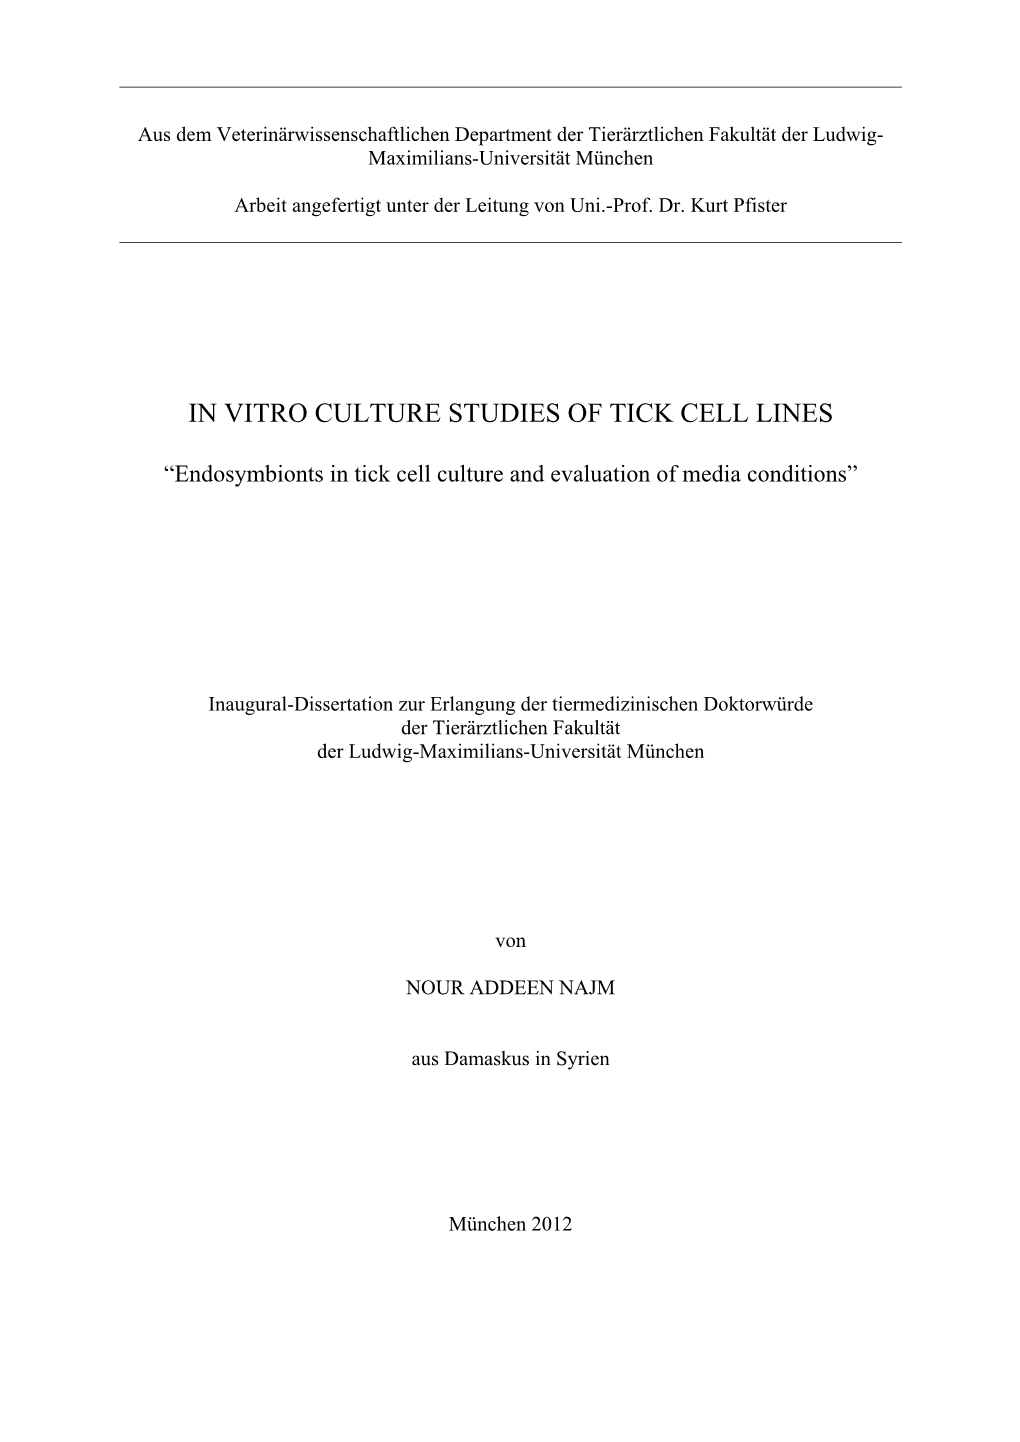 In Vitro Culture Studies of Tick Cell Lines